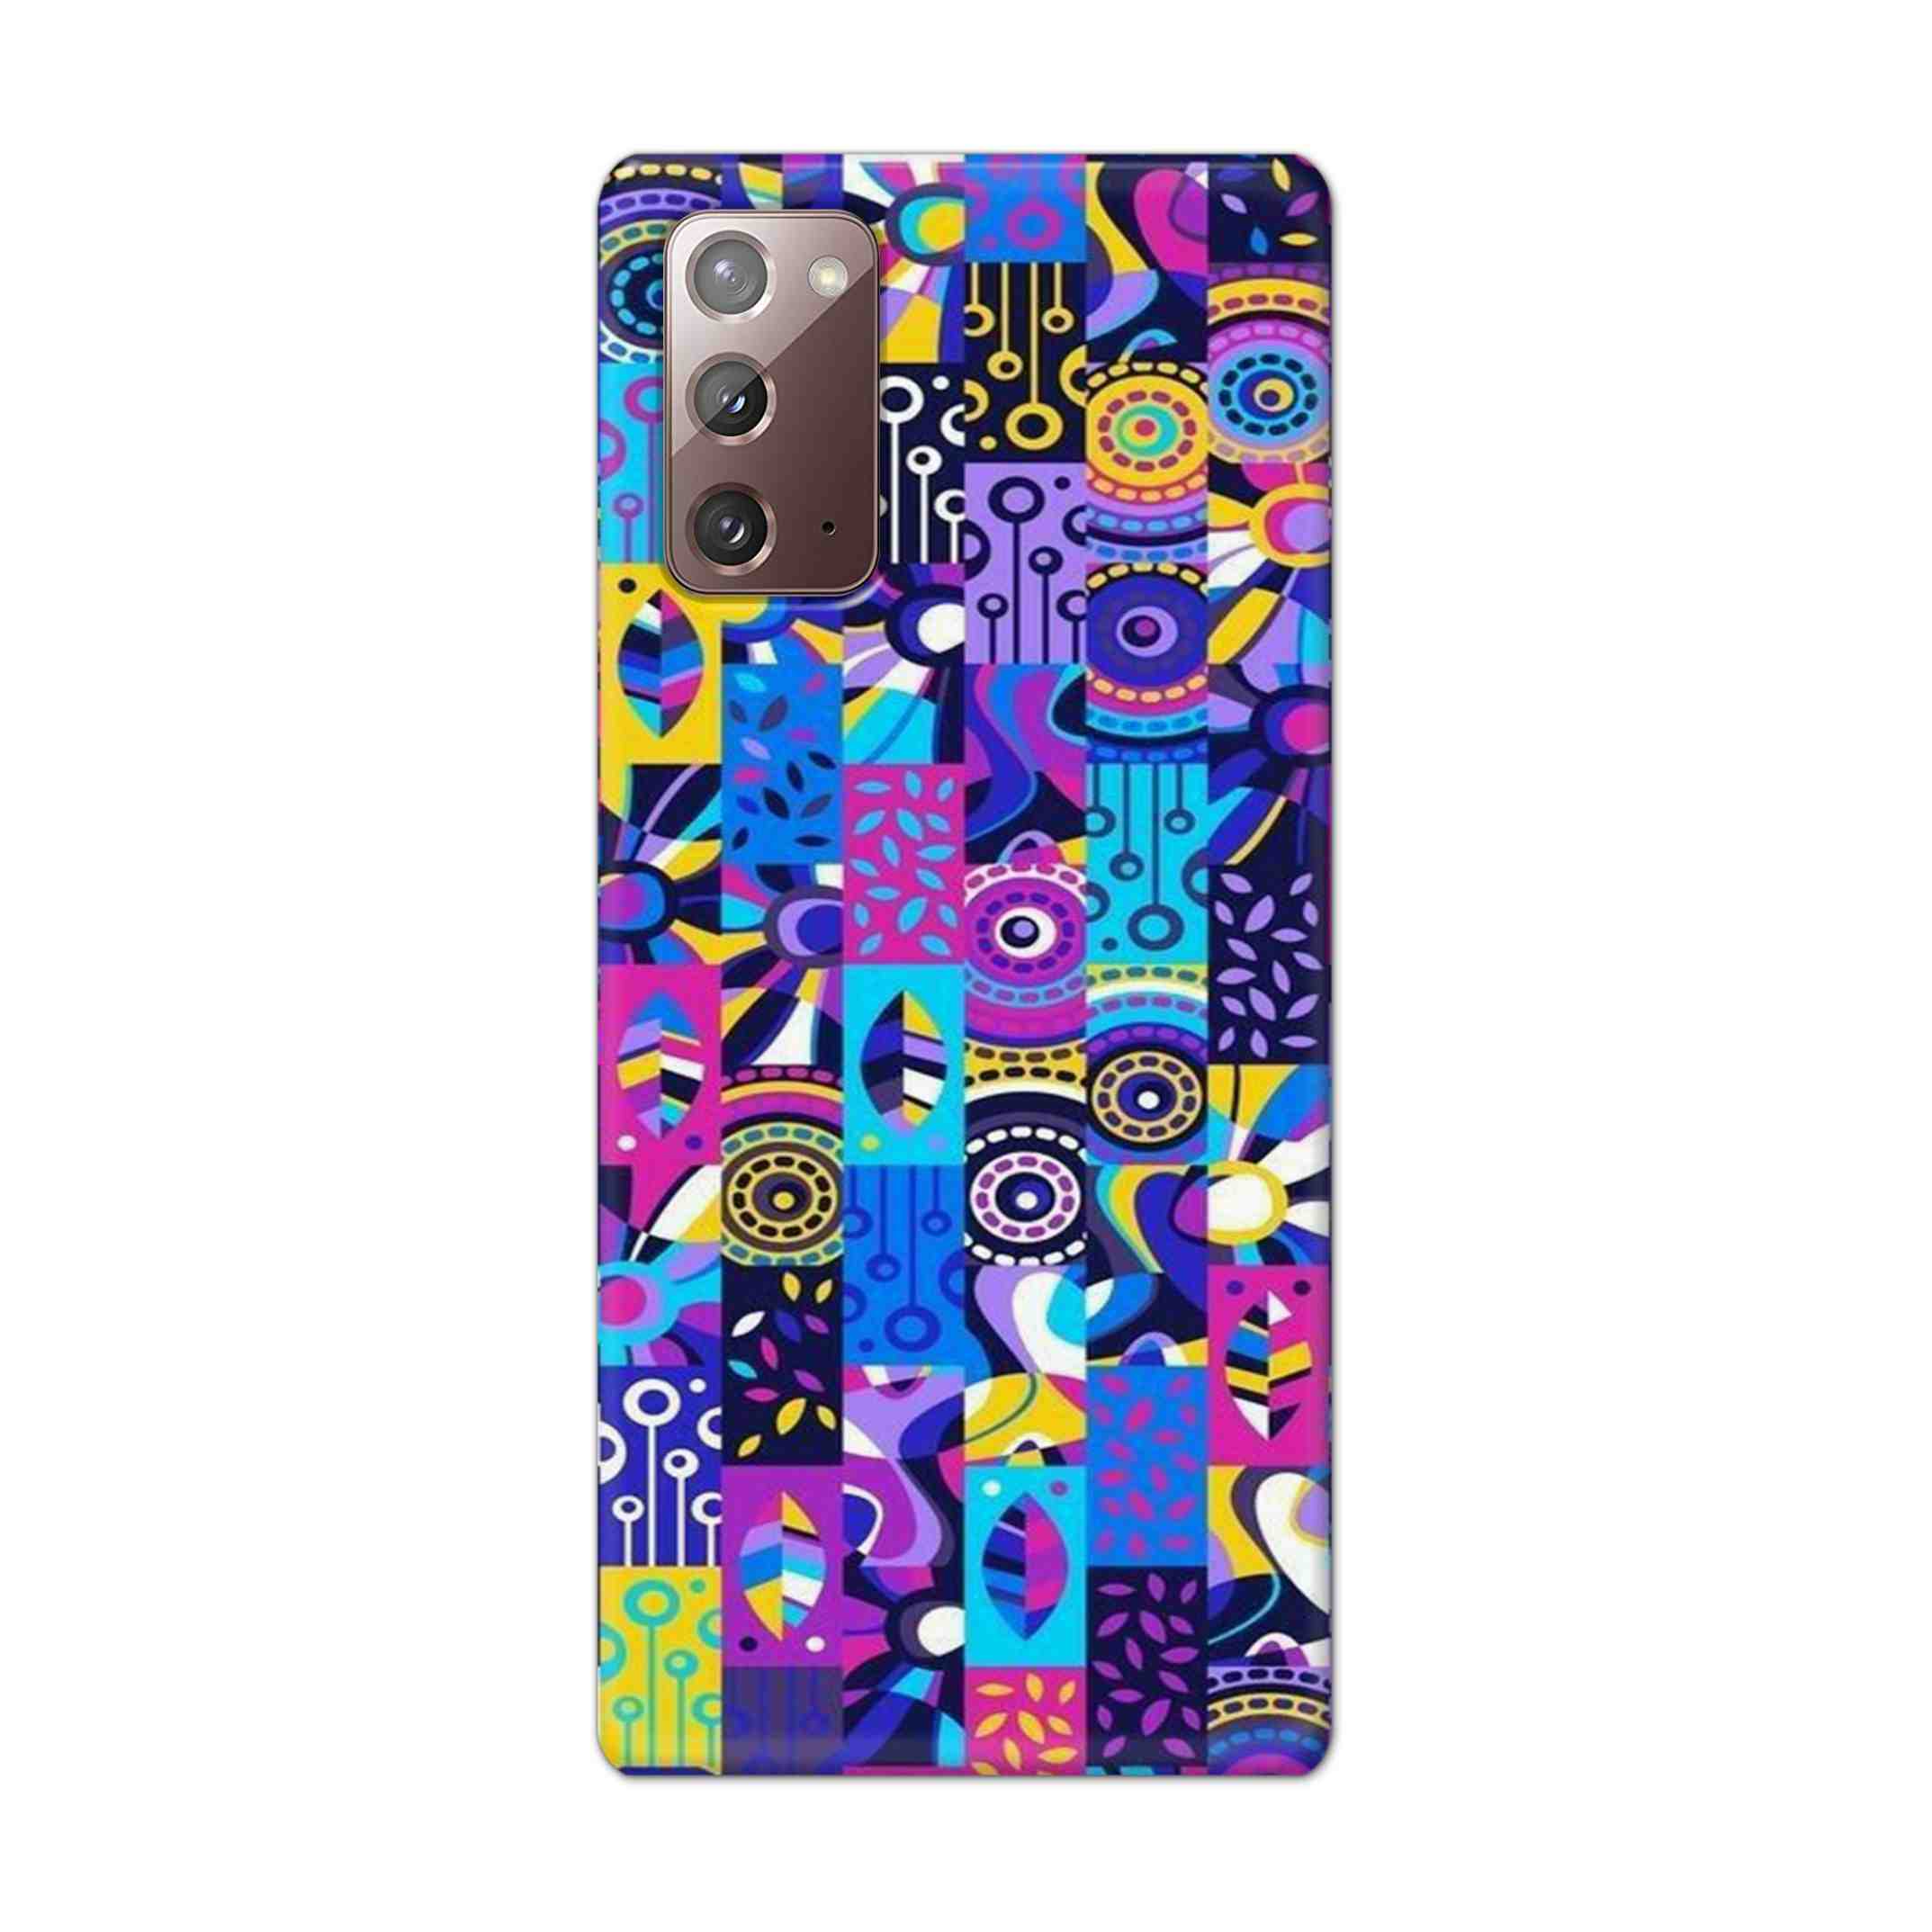 Buy Rainbow Art Hard Back Mobile Phone Case Cover For Samsung Galaxy Note 20 Online